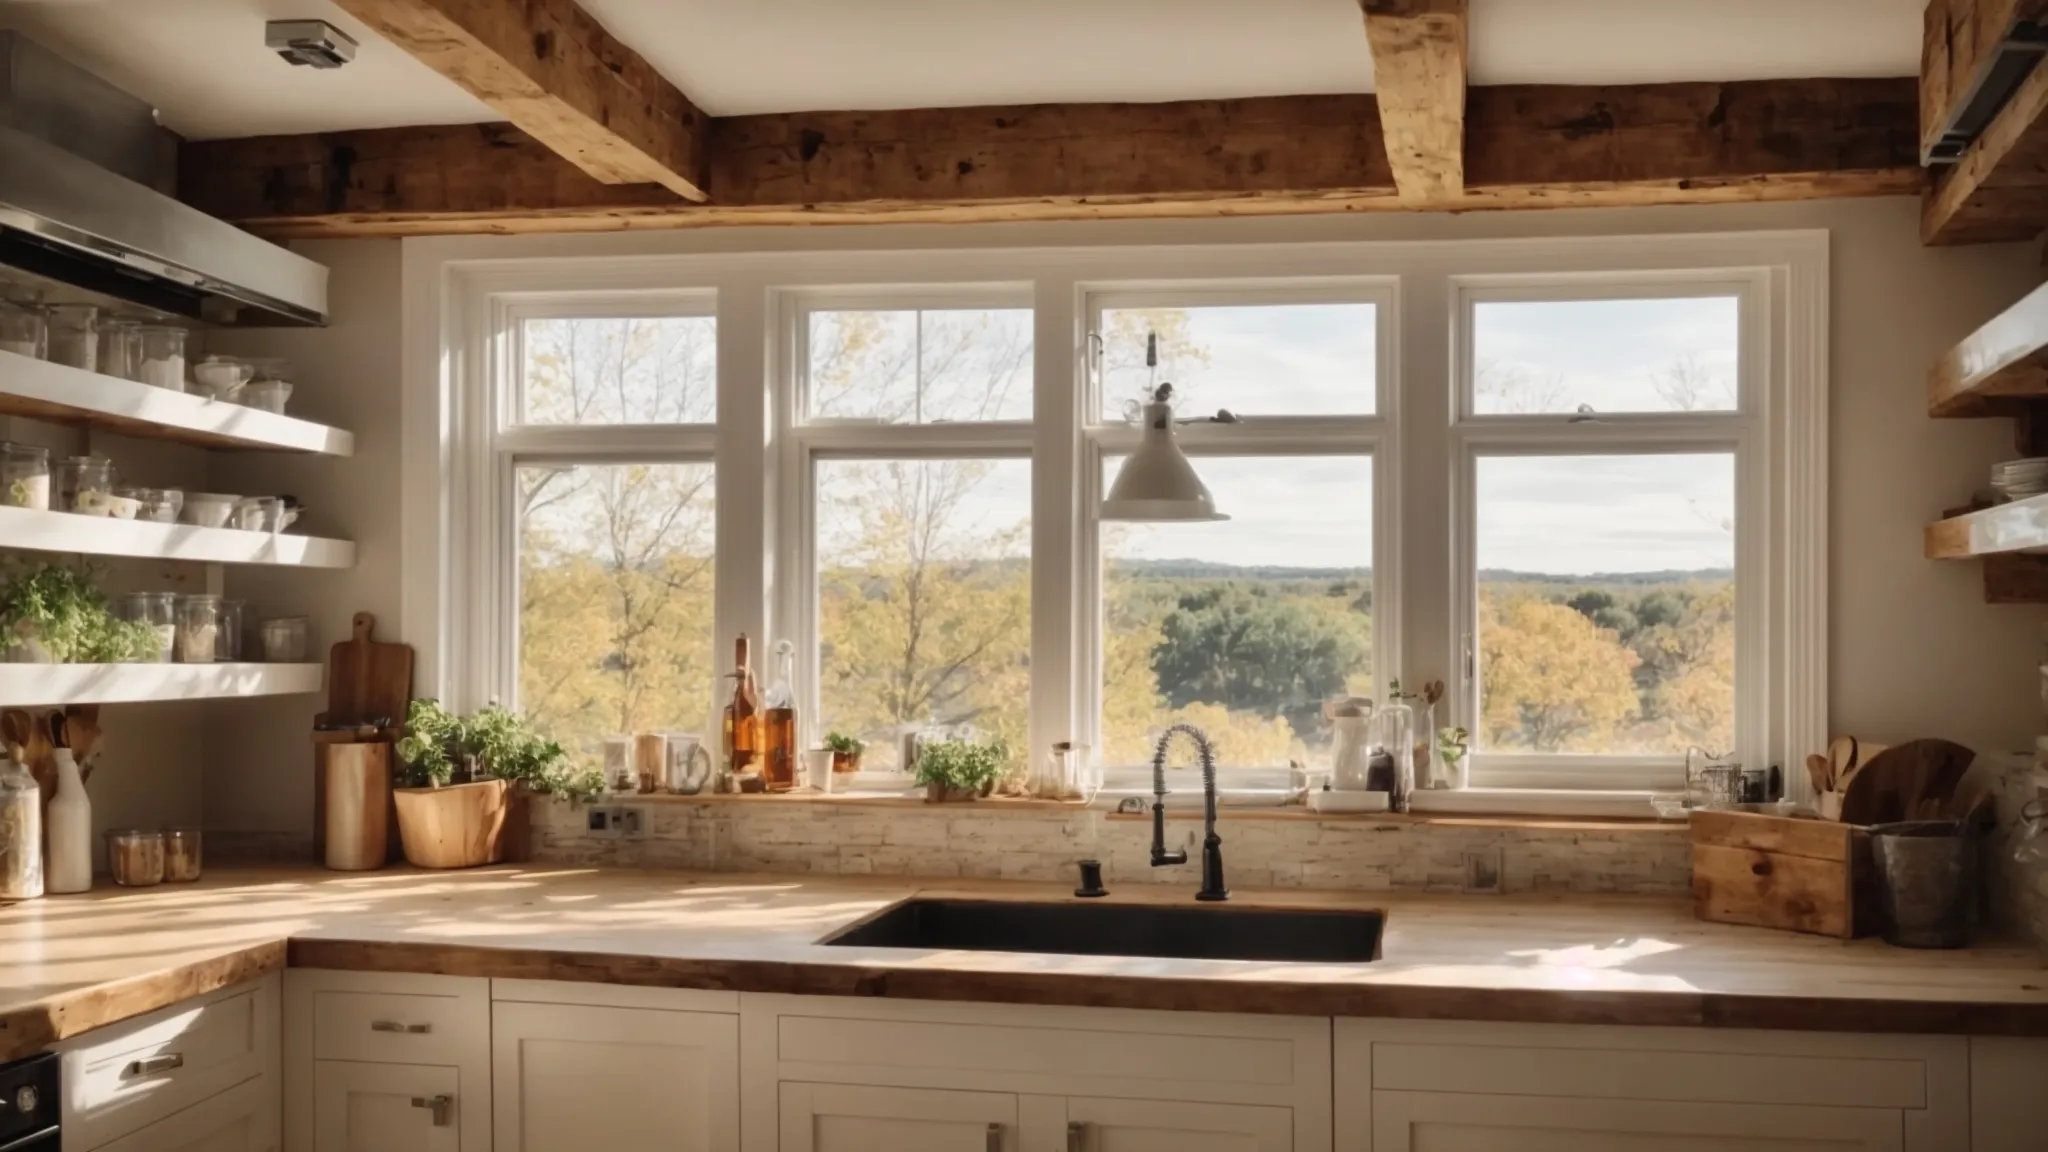 a wide kitchen space mid-renovation, featuring exposed beams and unfinished cabinets, with a visible Barrie Ontario landscape through the window.